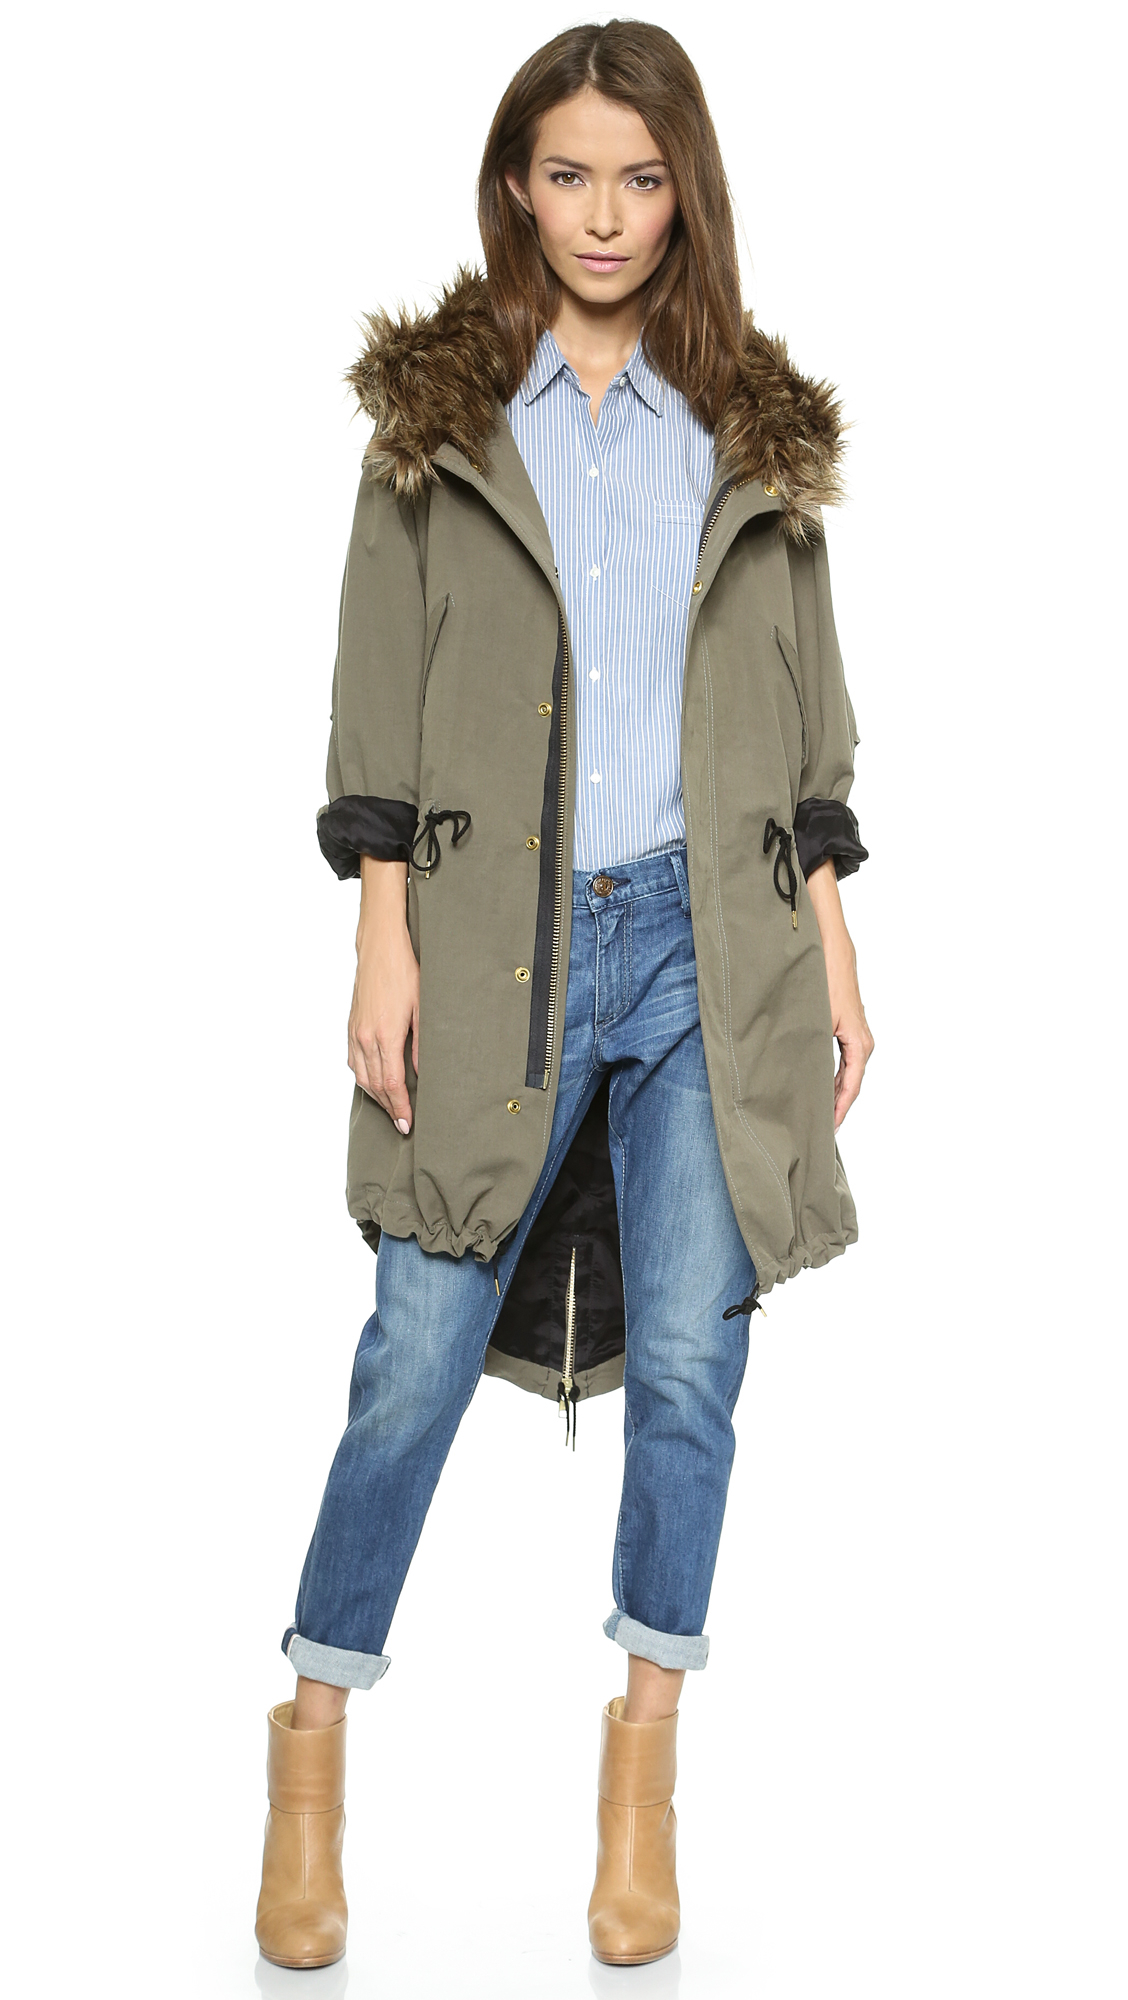 Lyst - Smythe Anorak With Faux Fur Hood - Army in Green